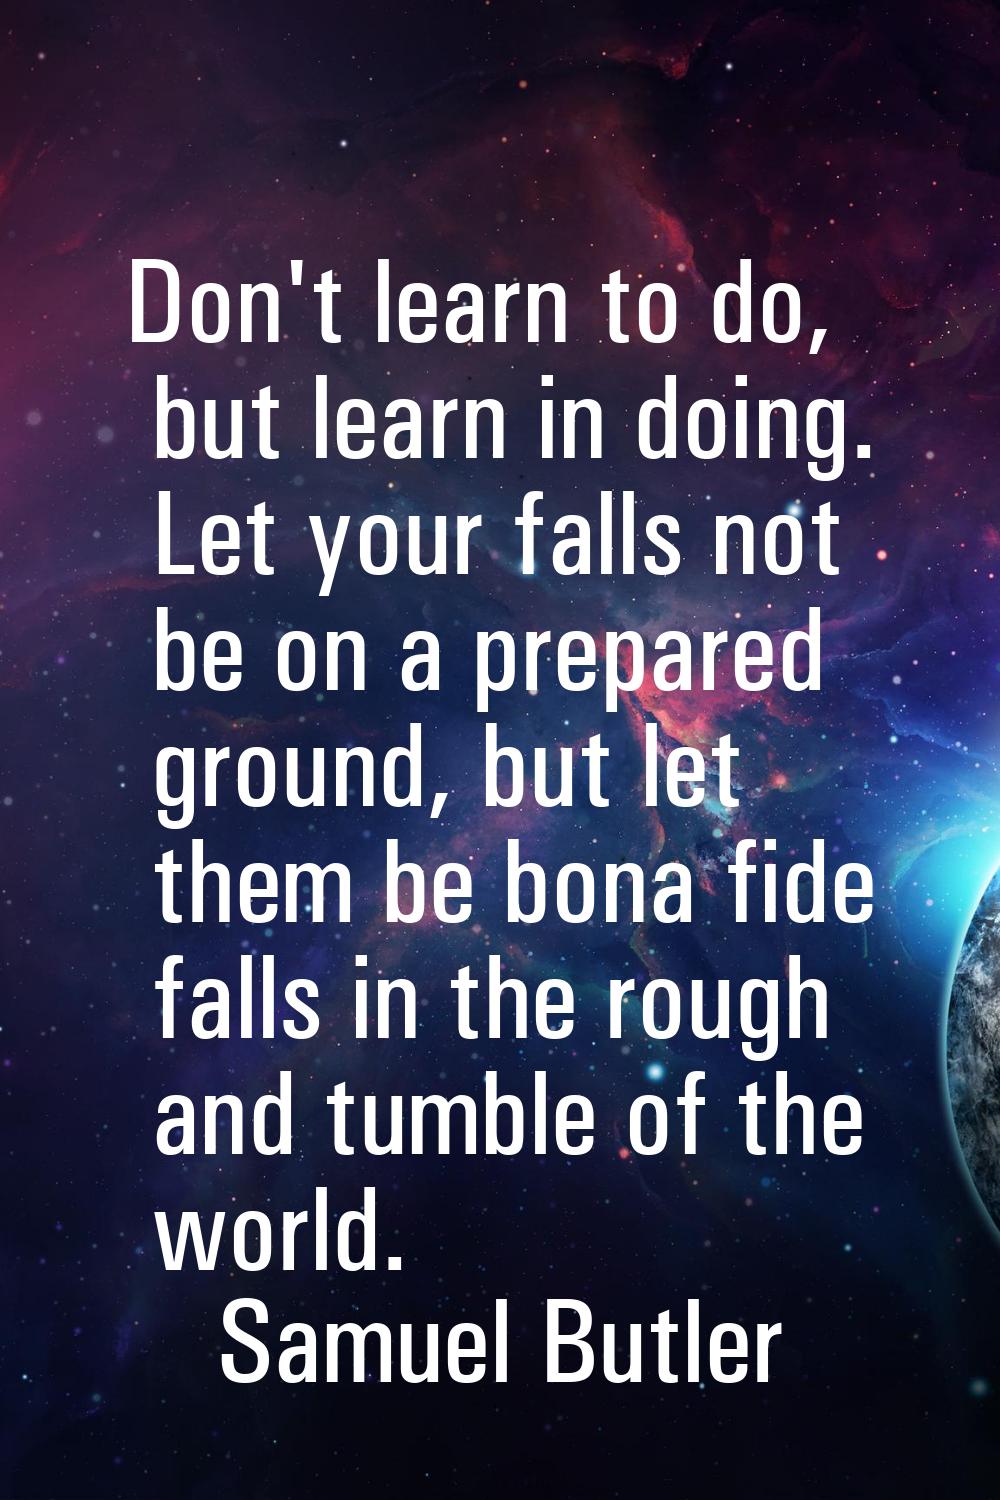 Don't learn to do, but learn in doing. Let your falls not be on a prepared ground, but let them be 